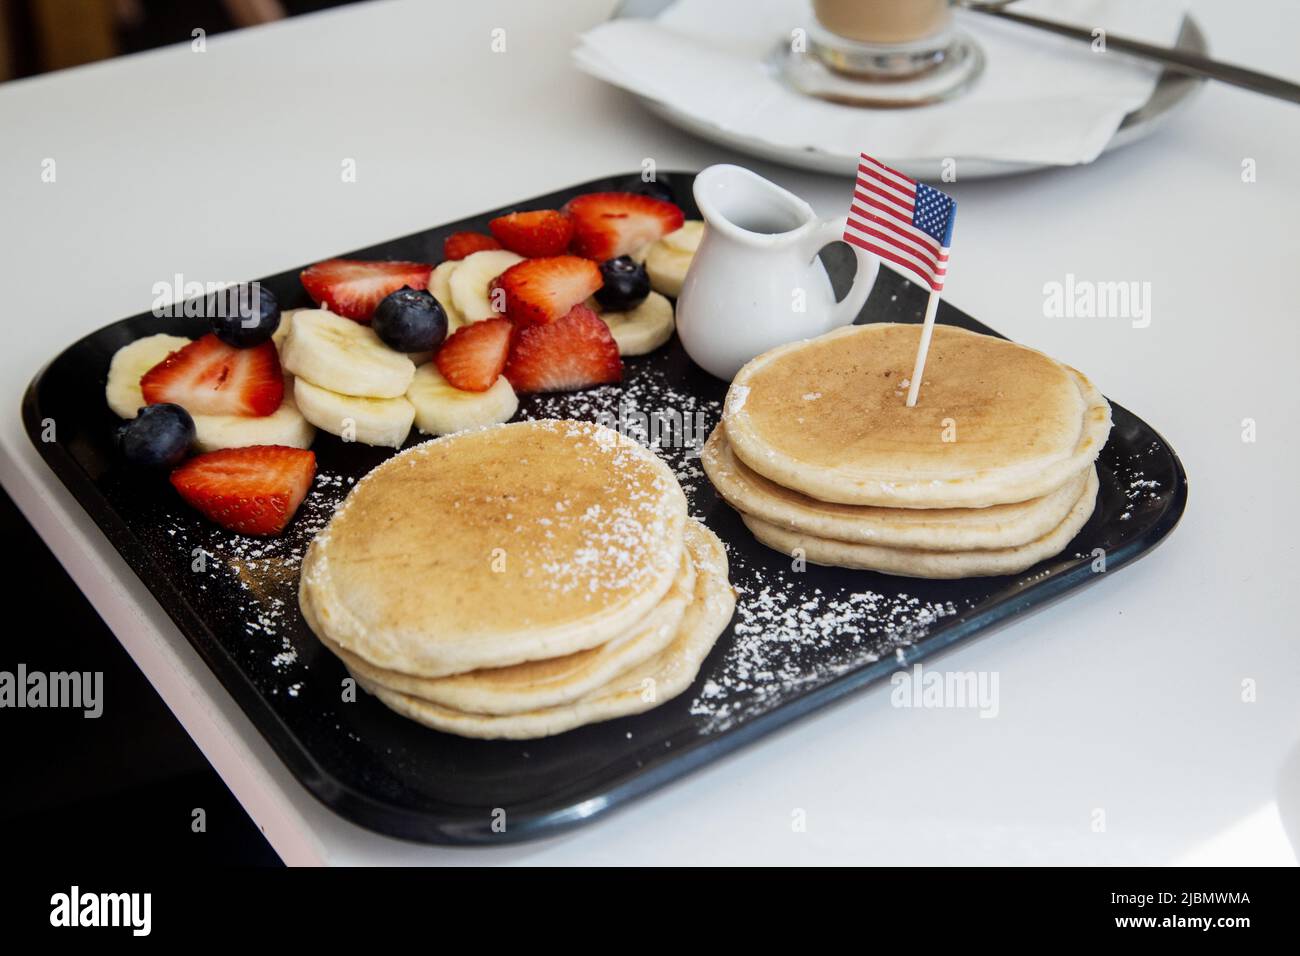 Pancakes and fruit and cream served on a rectangular tray with a miniature American flag inserted into the pancakes. Stock Photo